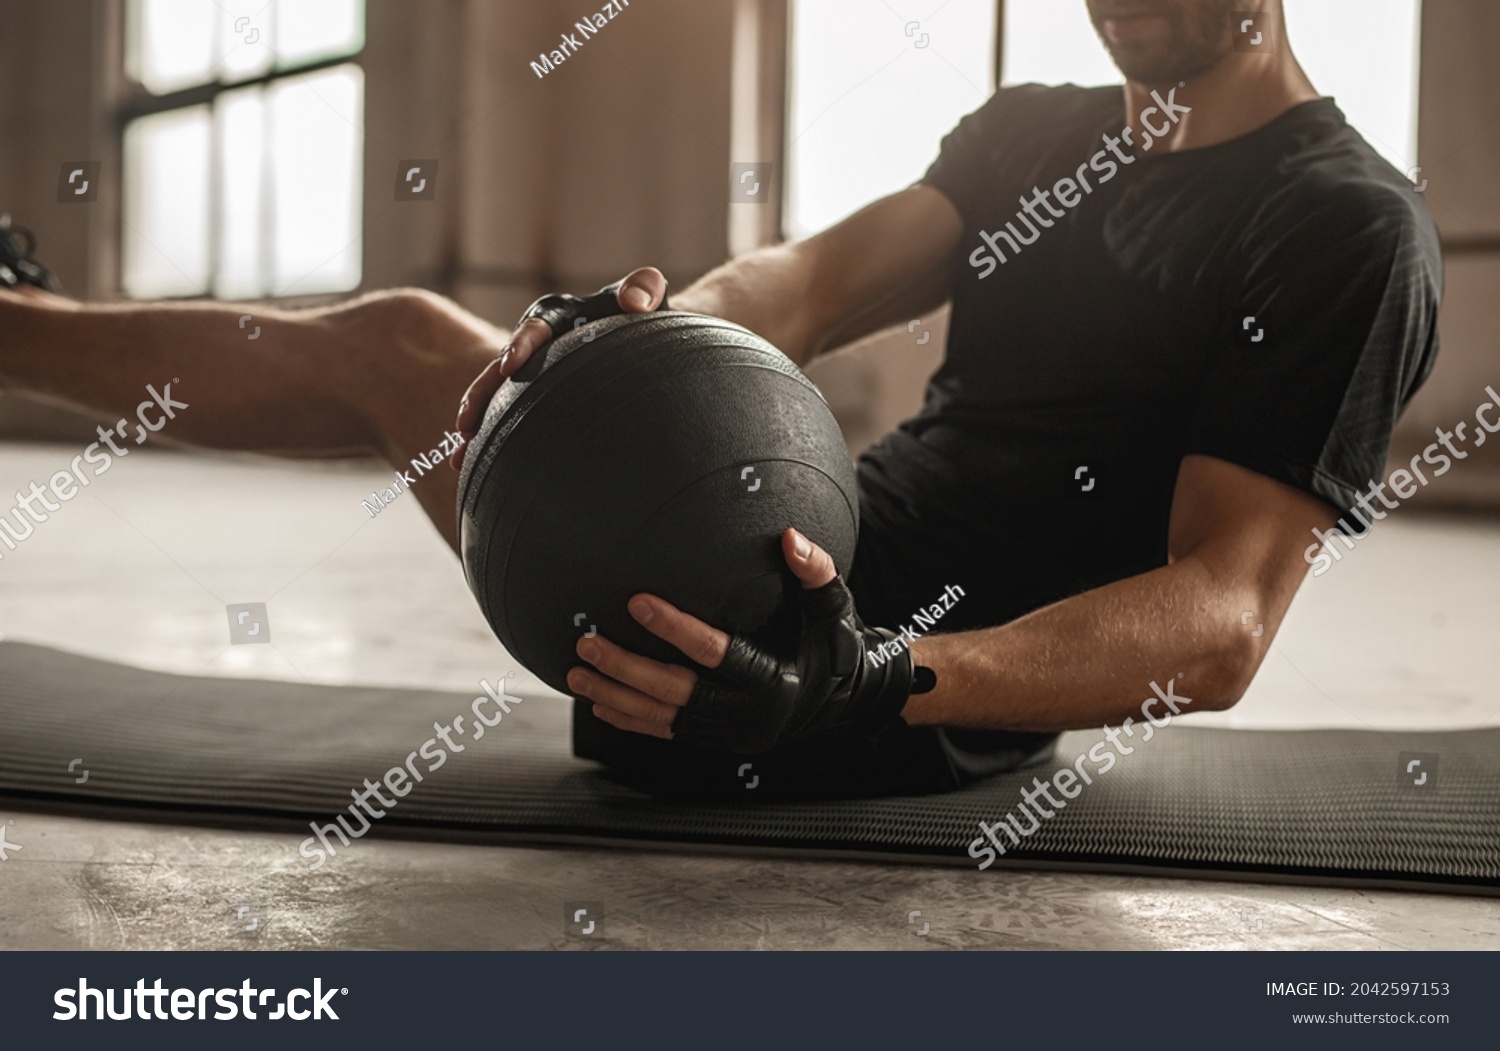 Side view of crop unrecognizable athletic male doing side twist exercise with medicine ball during intense functional training in gym #2042597153